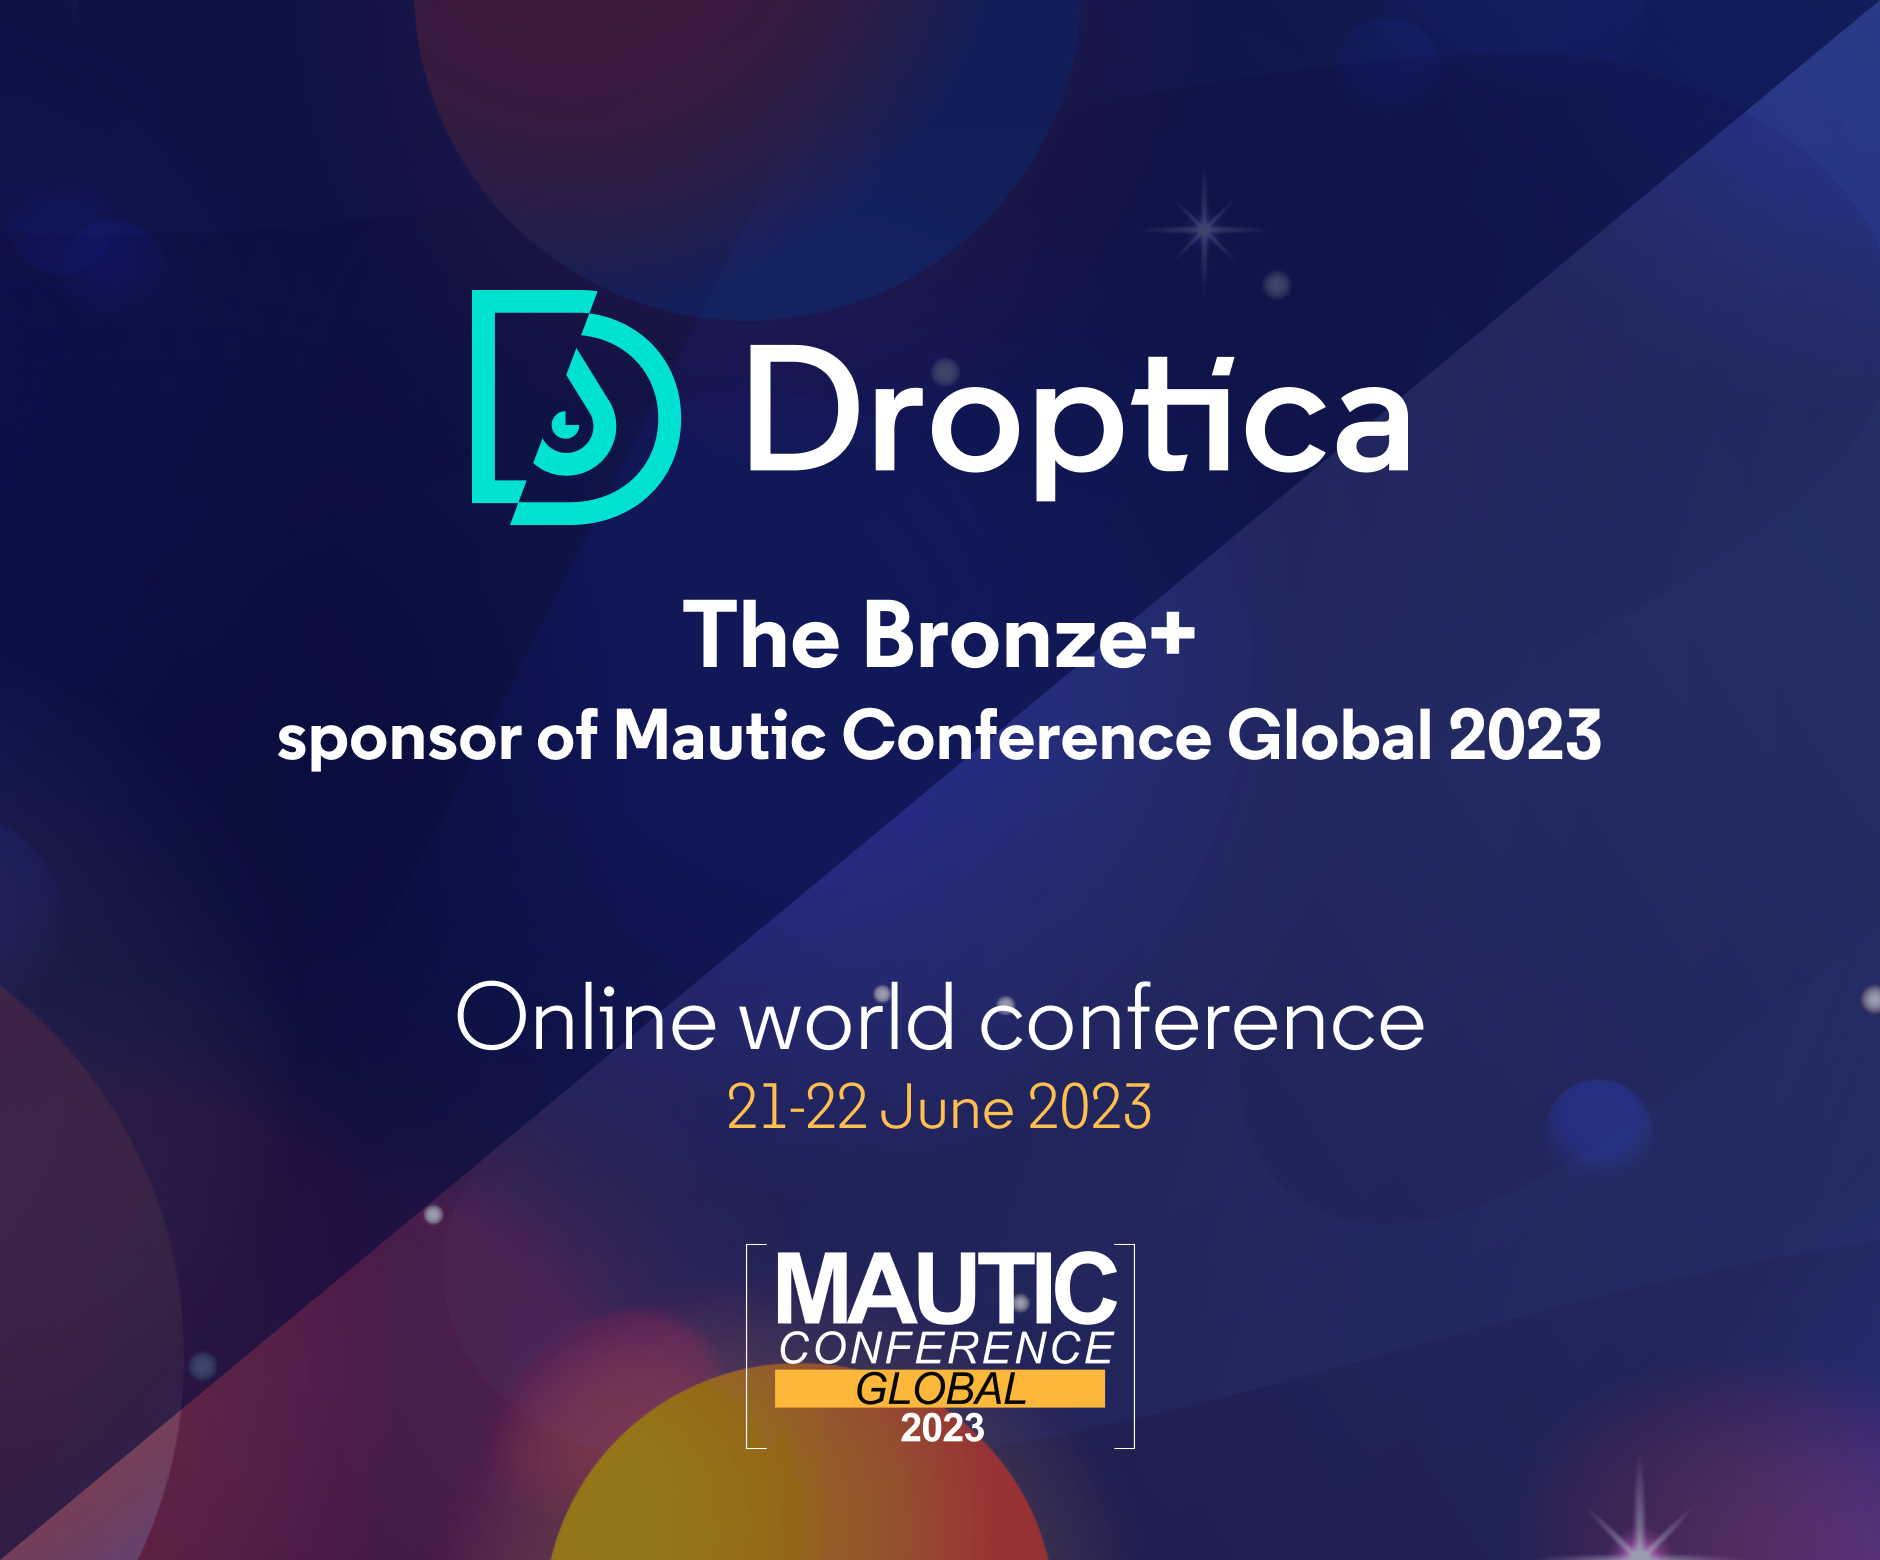 The Droptica team will be attending the online Mautic Conference Global 2023 on June 21st and 22nd.